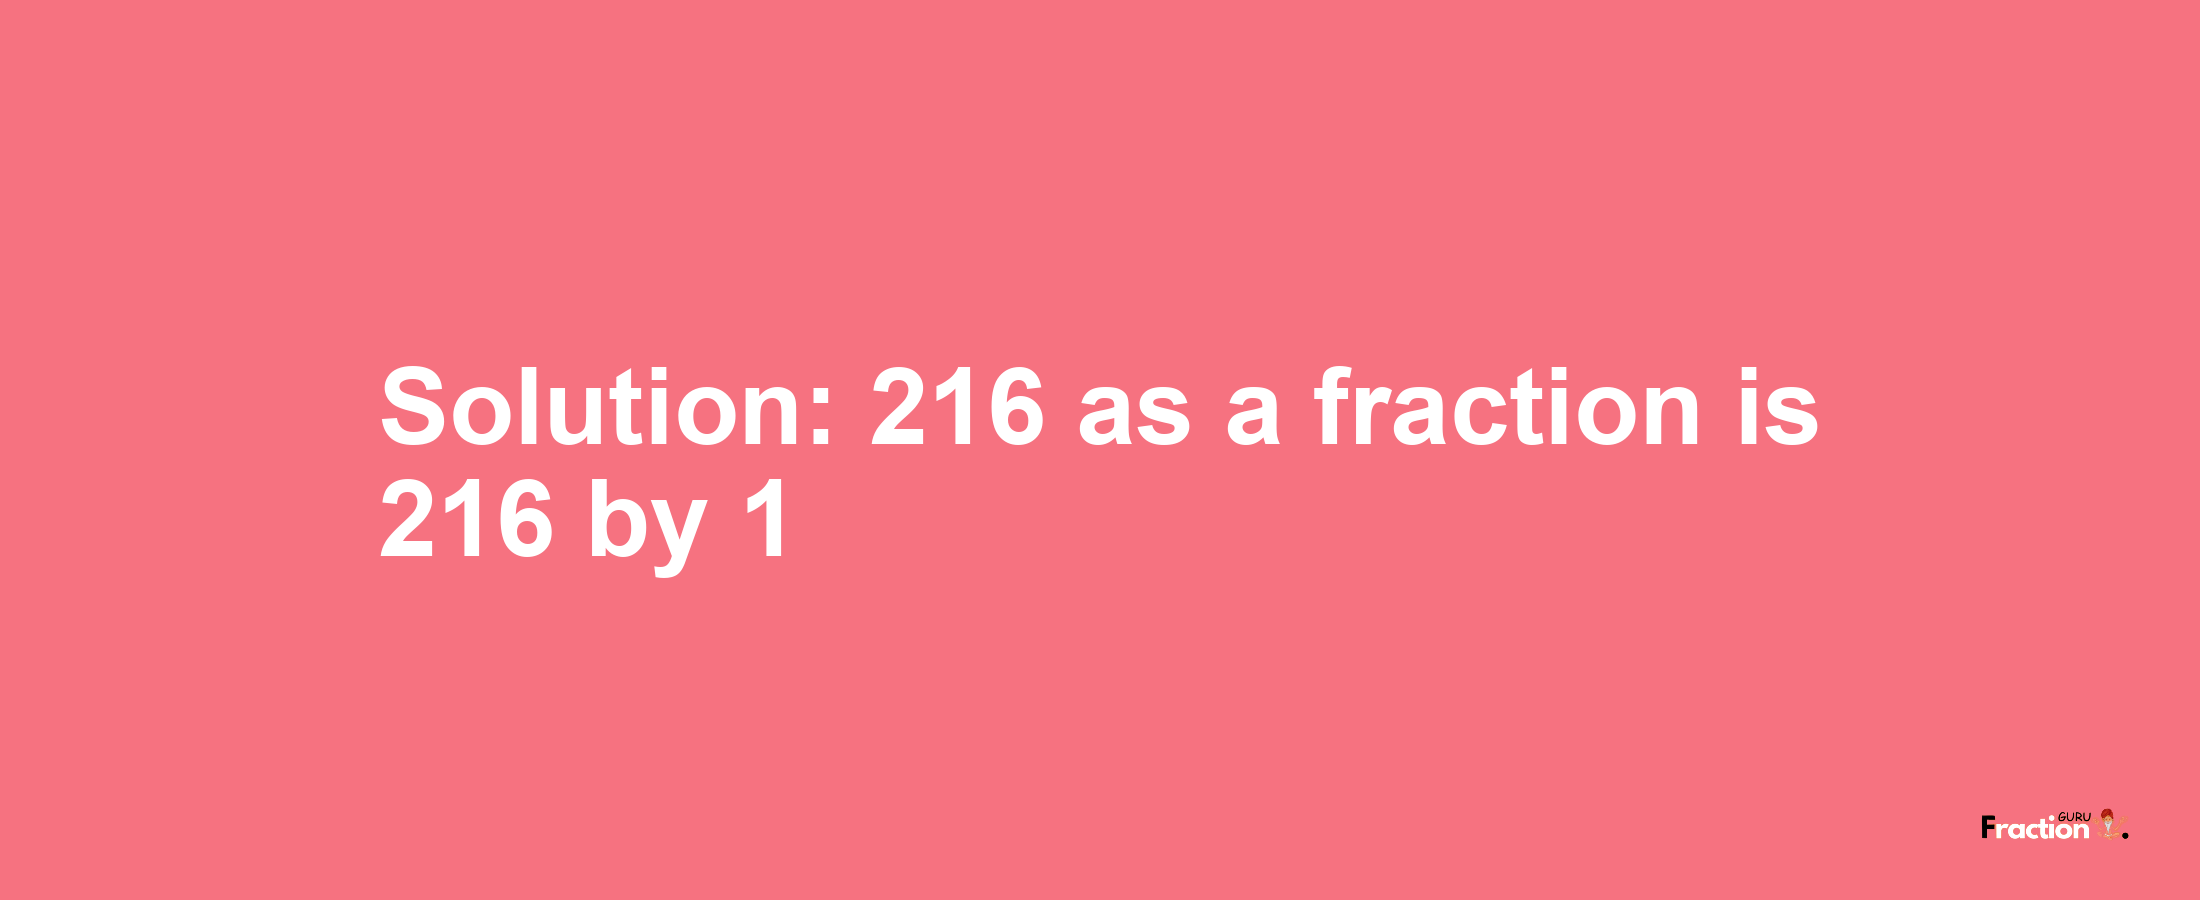 Solution:216 as a fraction is 216/1